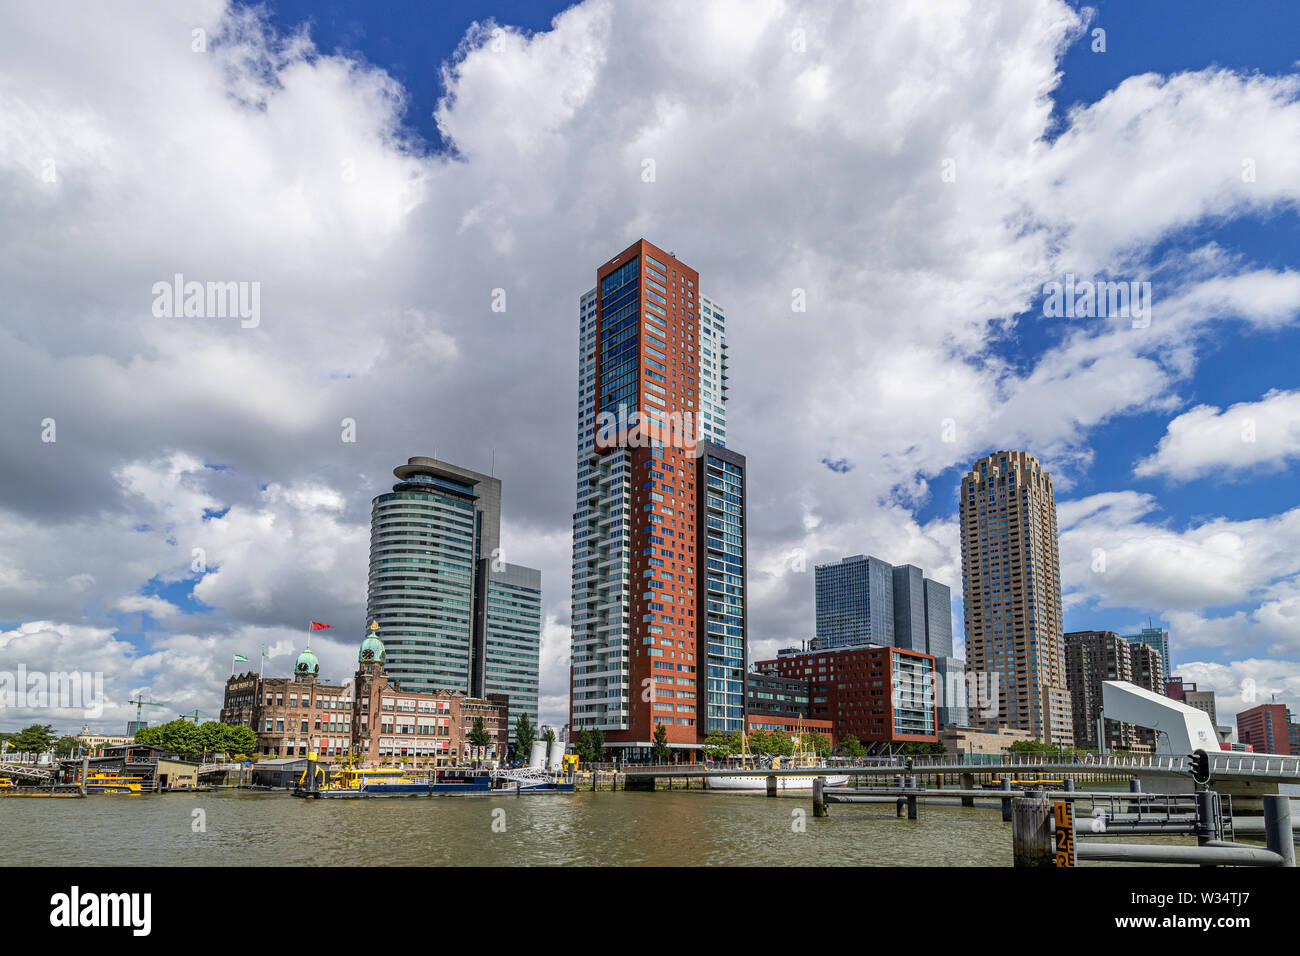 Skyline of Kop van Zuid district in Rotterdam, Netherlands, with Hotel New York and skyscapers World Port Center, Montevideo tower and New Orleans tow Stock Photo